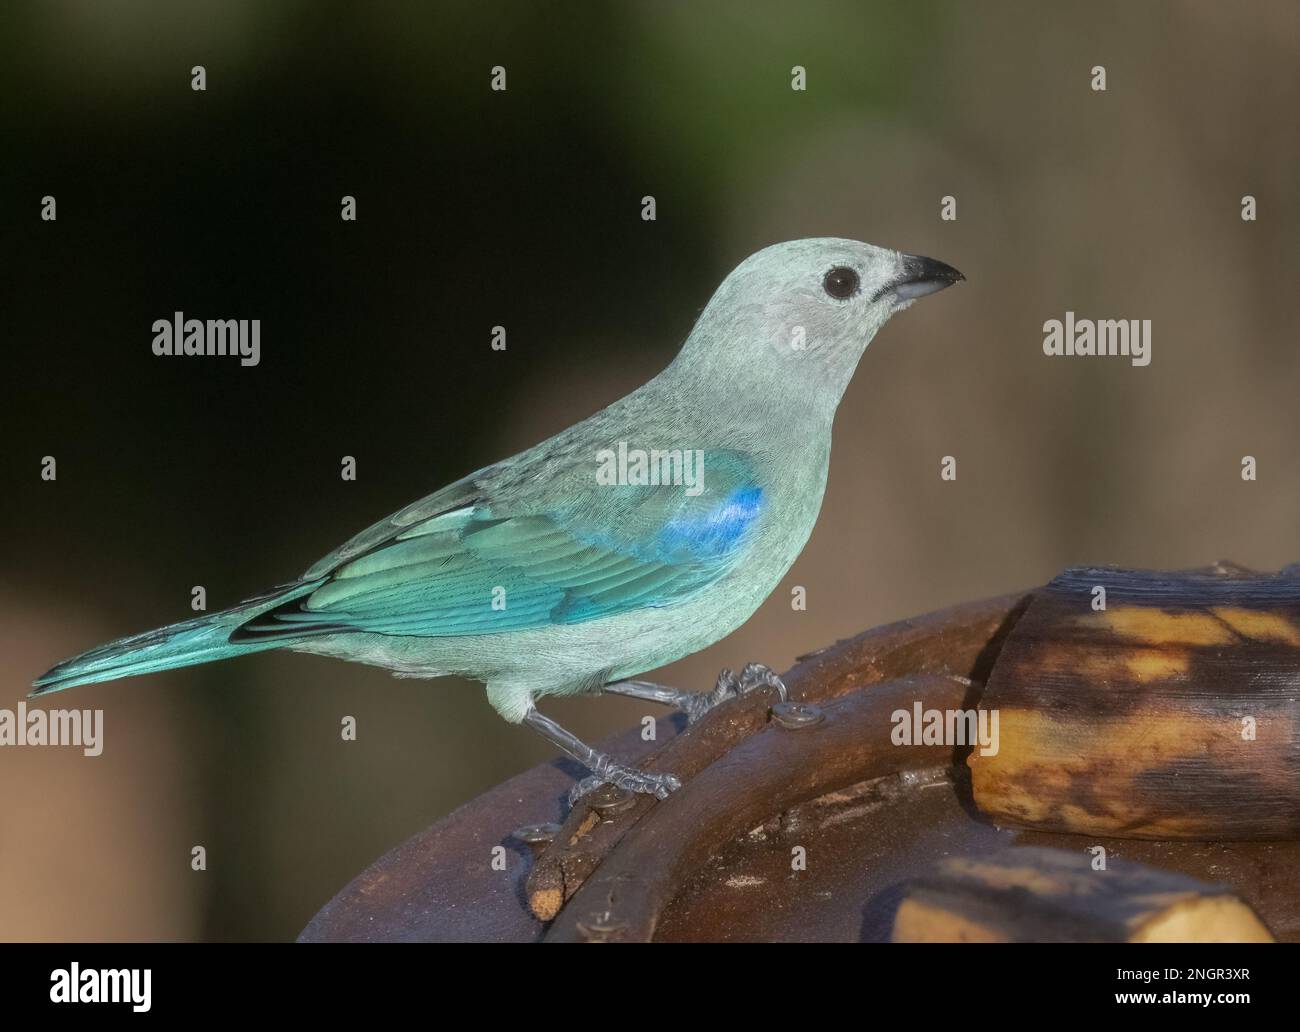 A Blue-gray Tanager at a tray feeder in Costa Rica Stock Photo